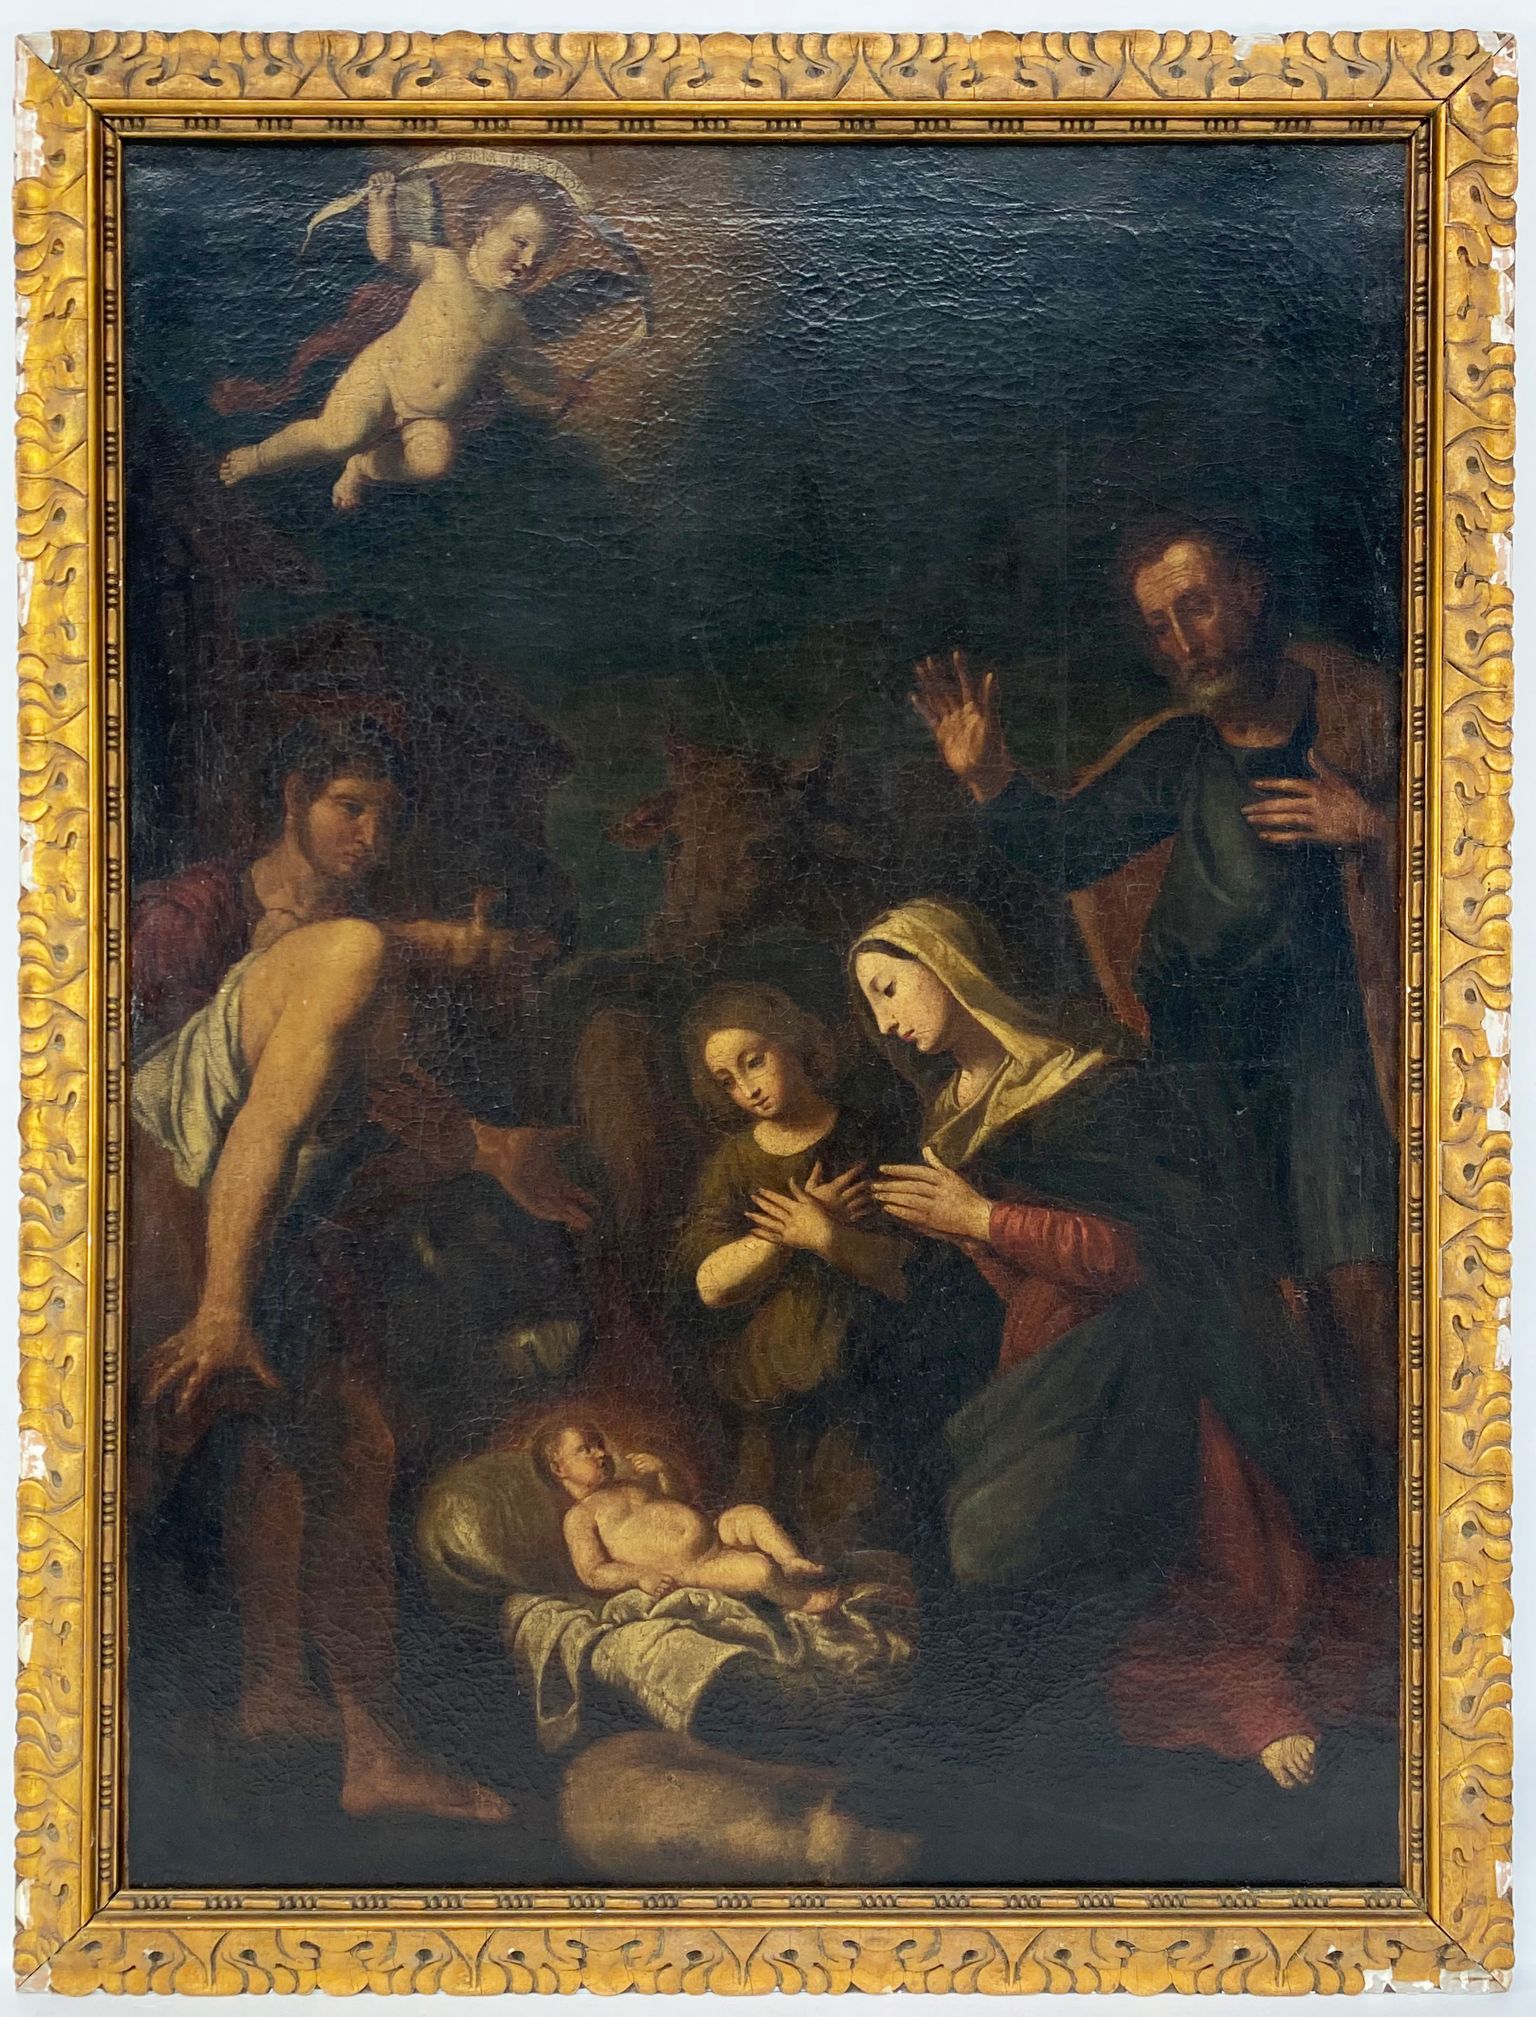 Oil on canvas depicting the Nativity